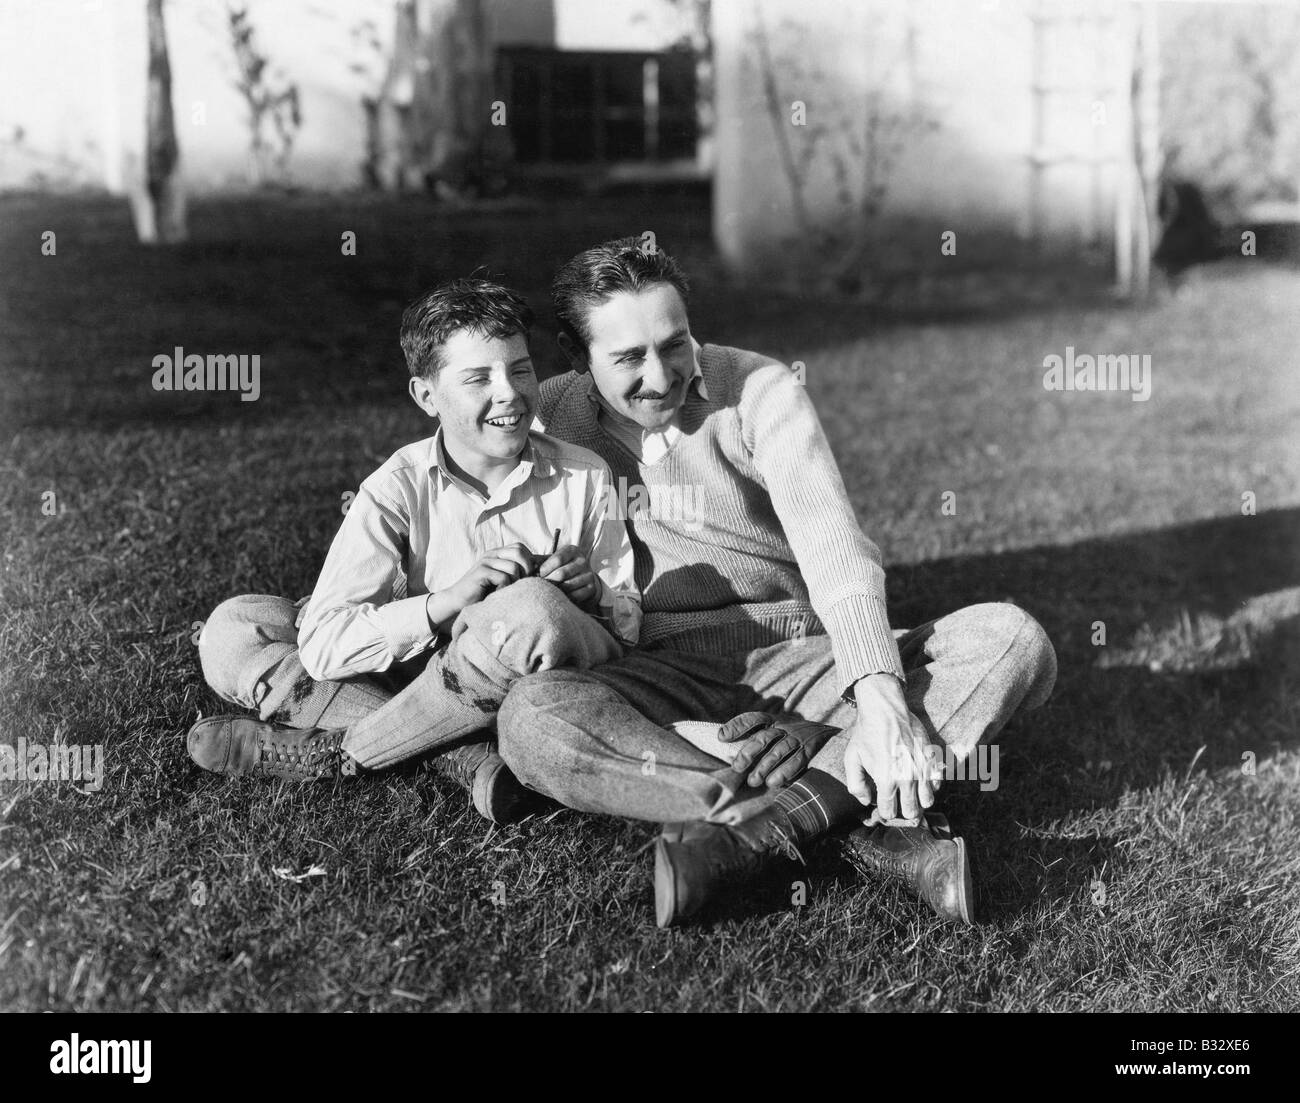 Father and son sitting together on the grass in the back yard Stock Photo